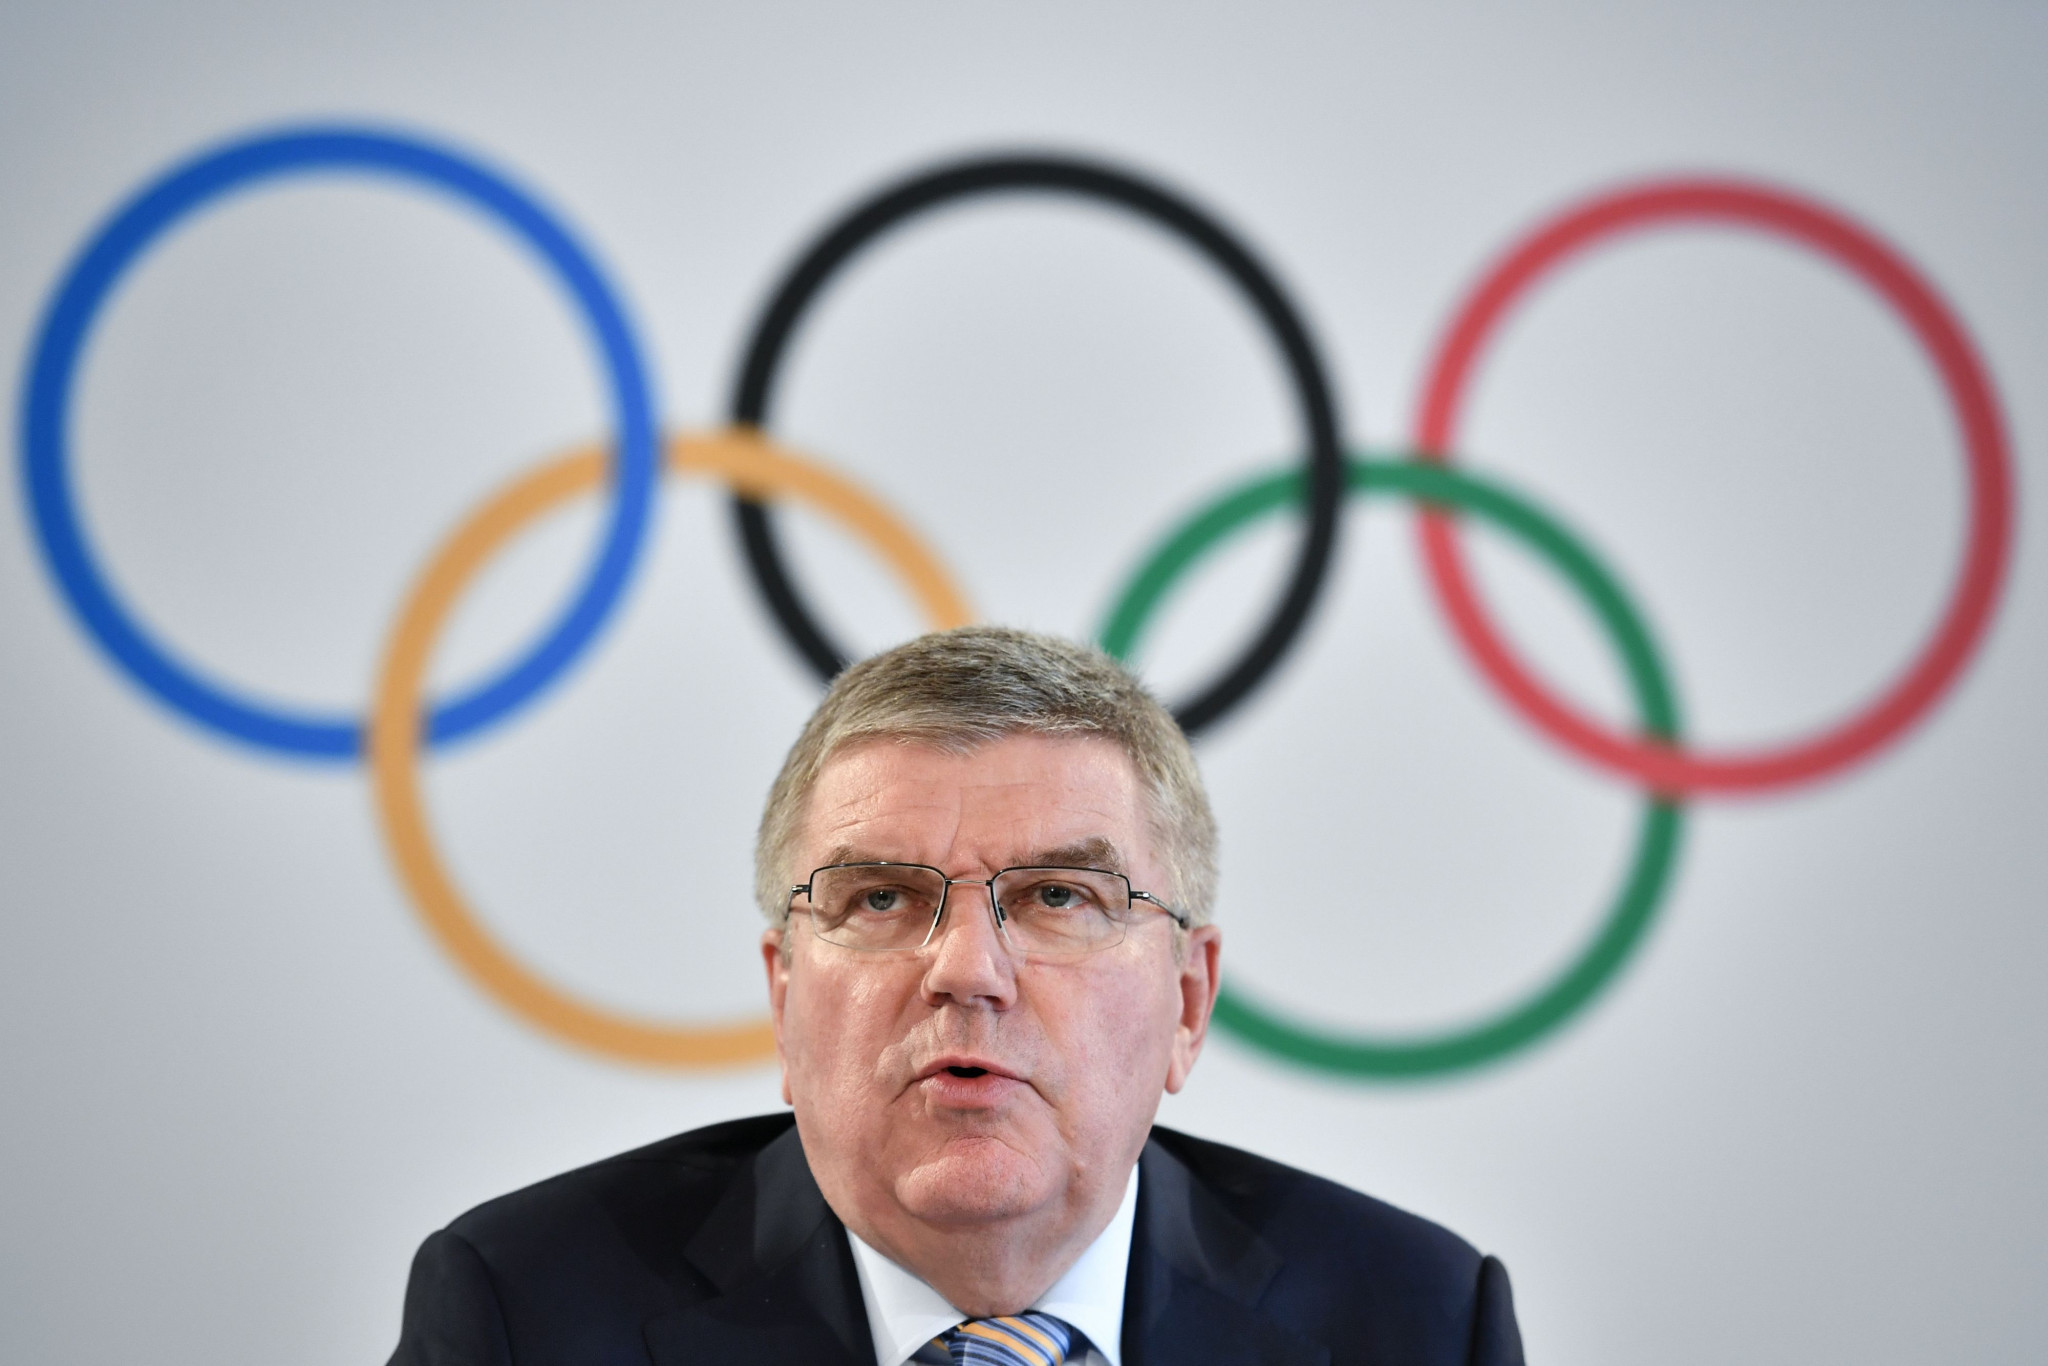 IOC President Thomas Bach has previously said boxing's place on the Olympic programme 